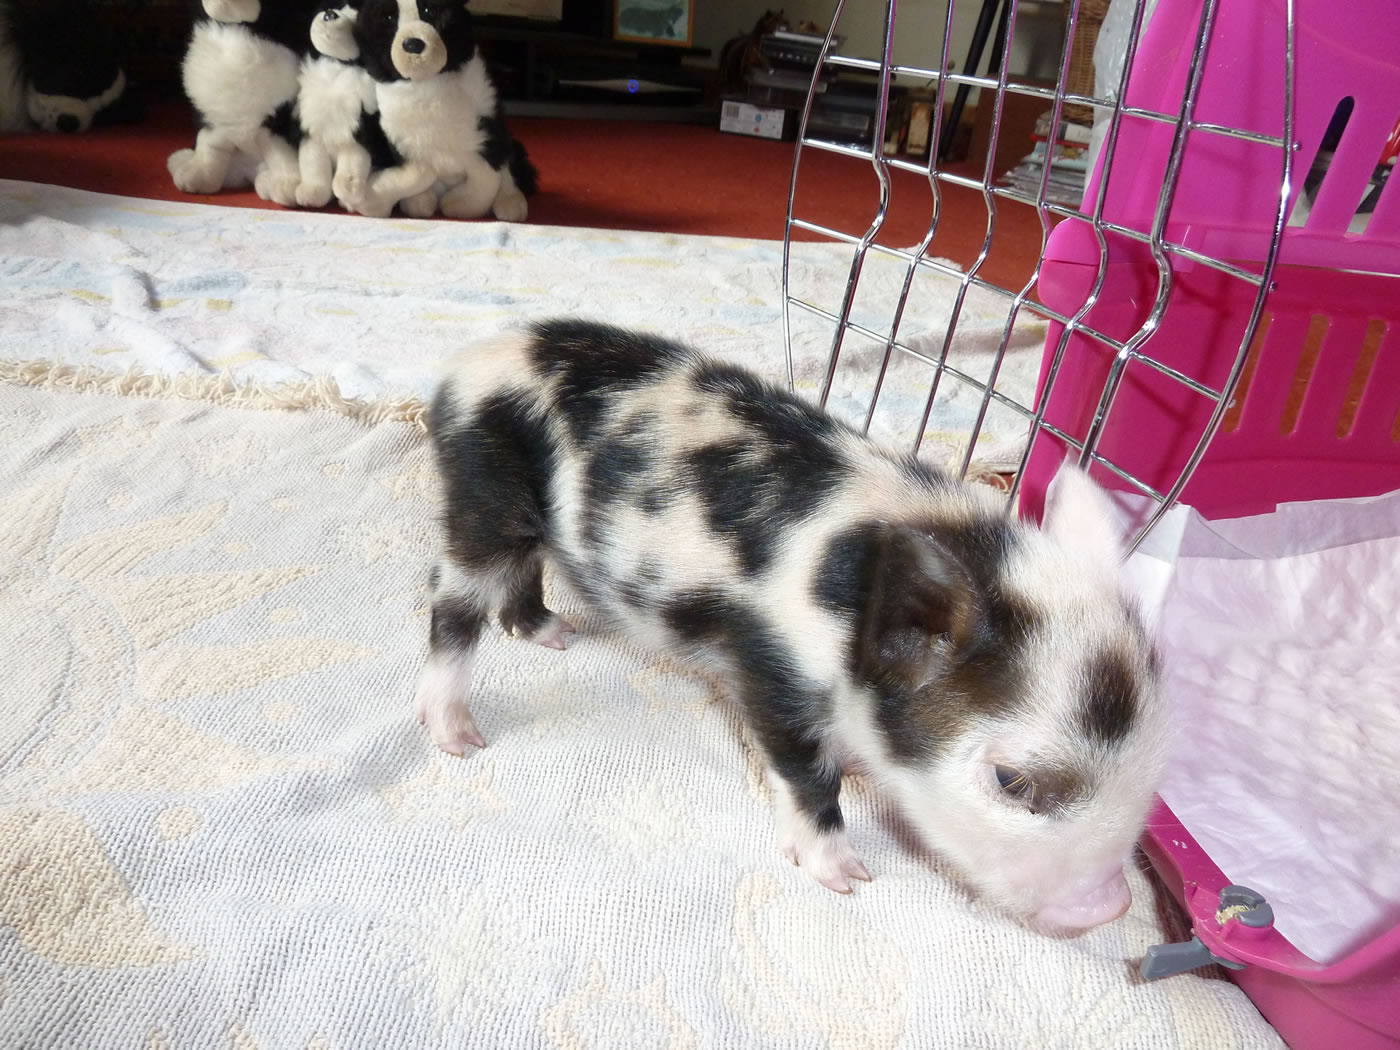 Picture of 6 day old Pet Kunekune piglet next tp the pink cat carrier